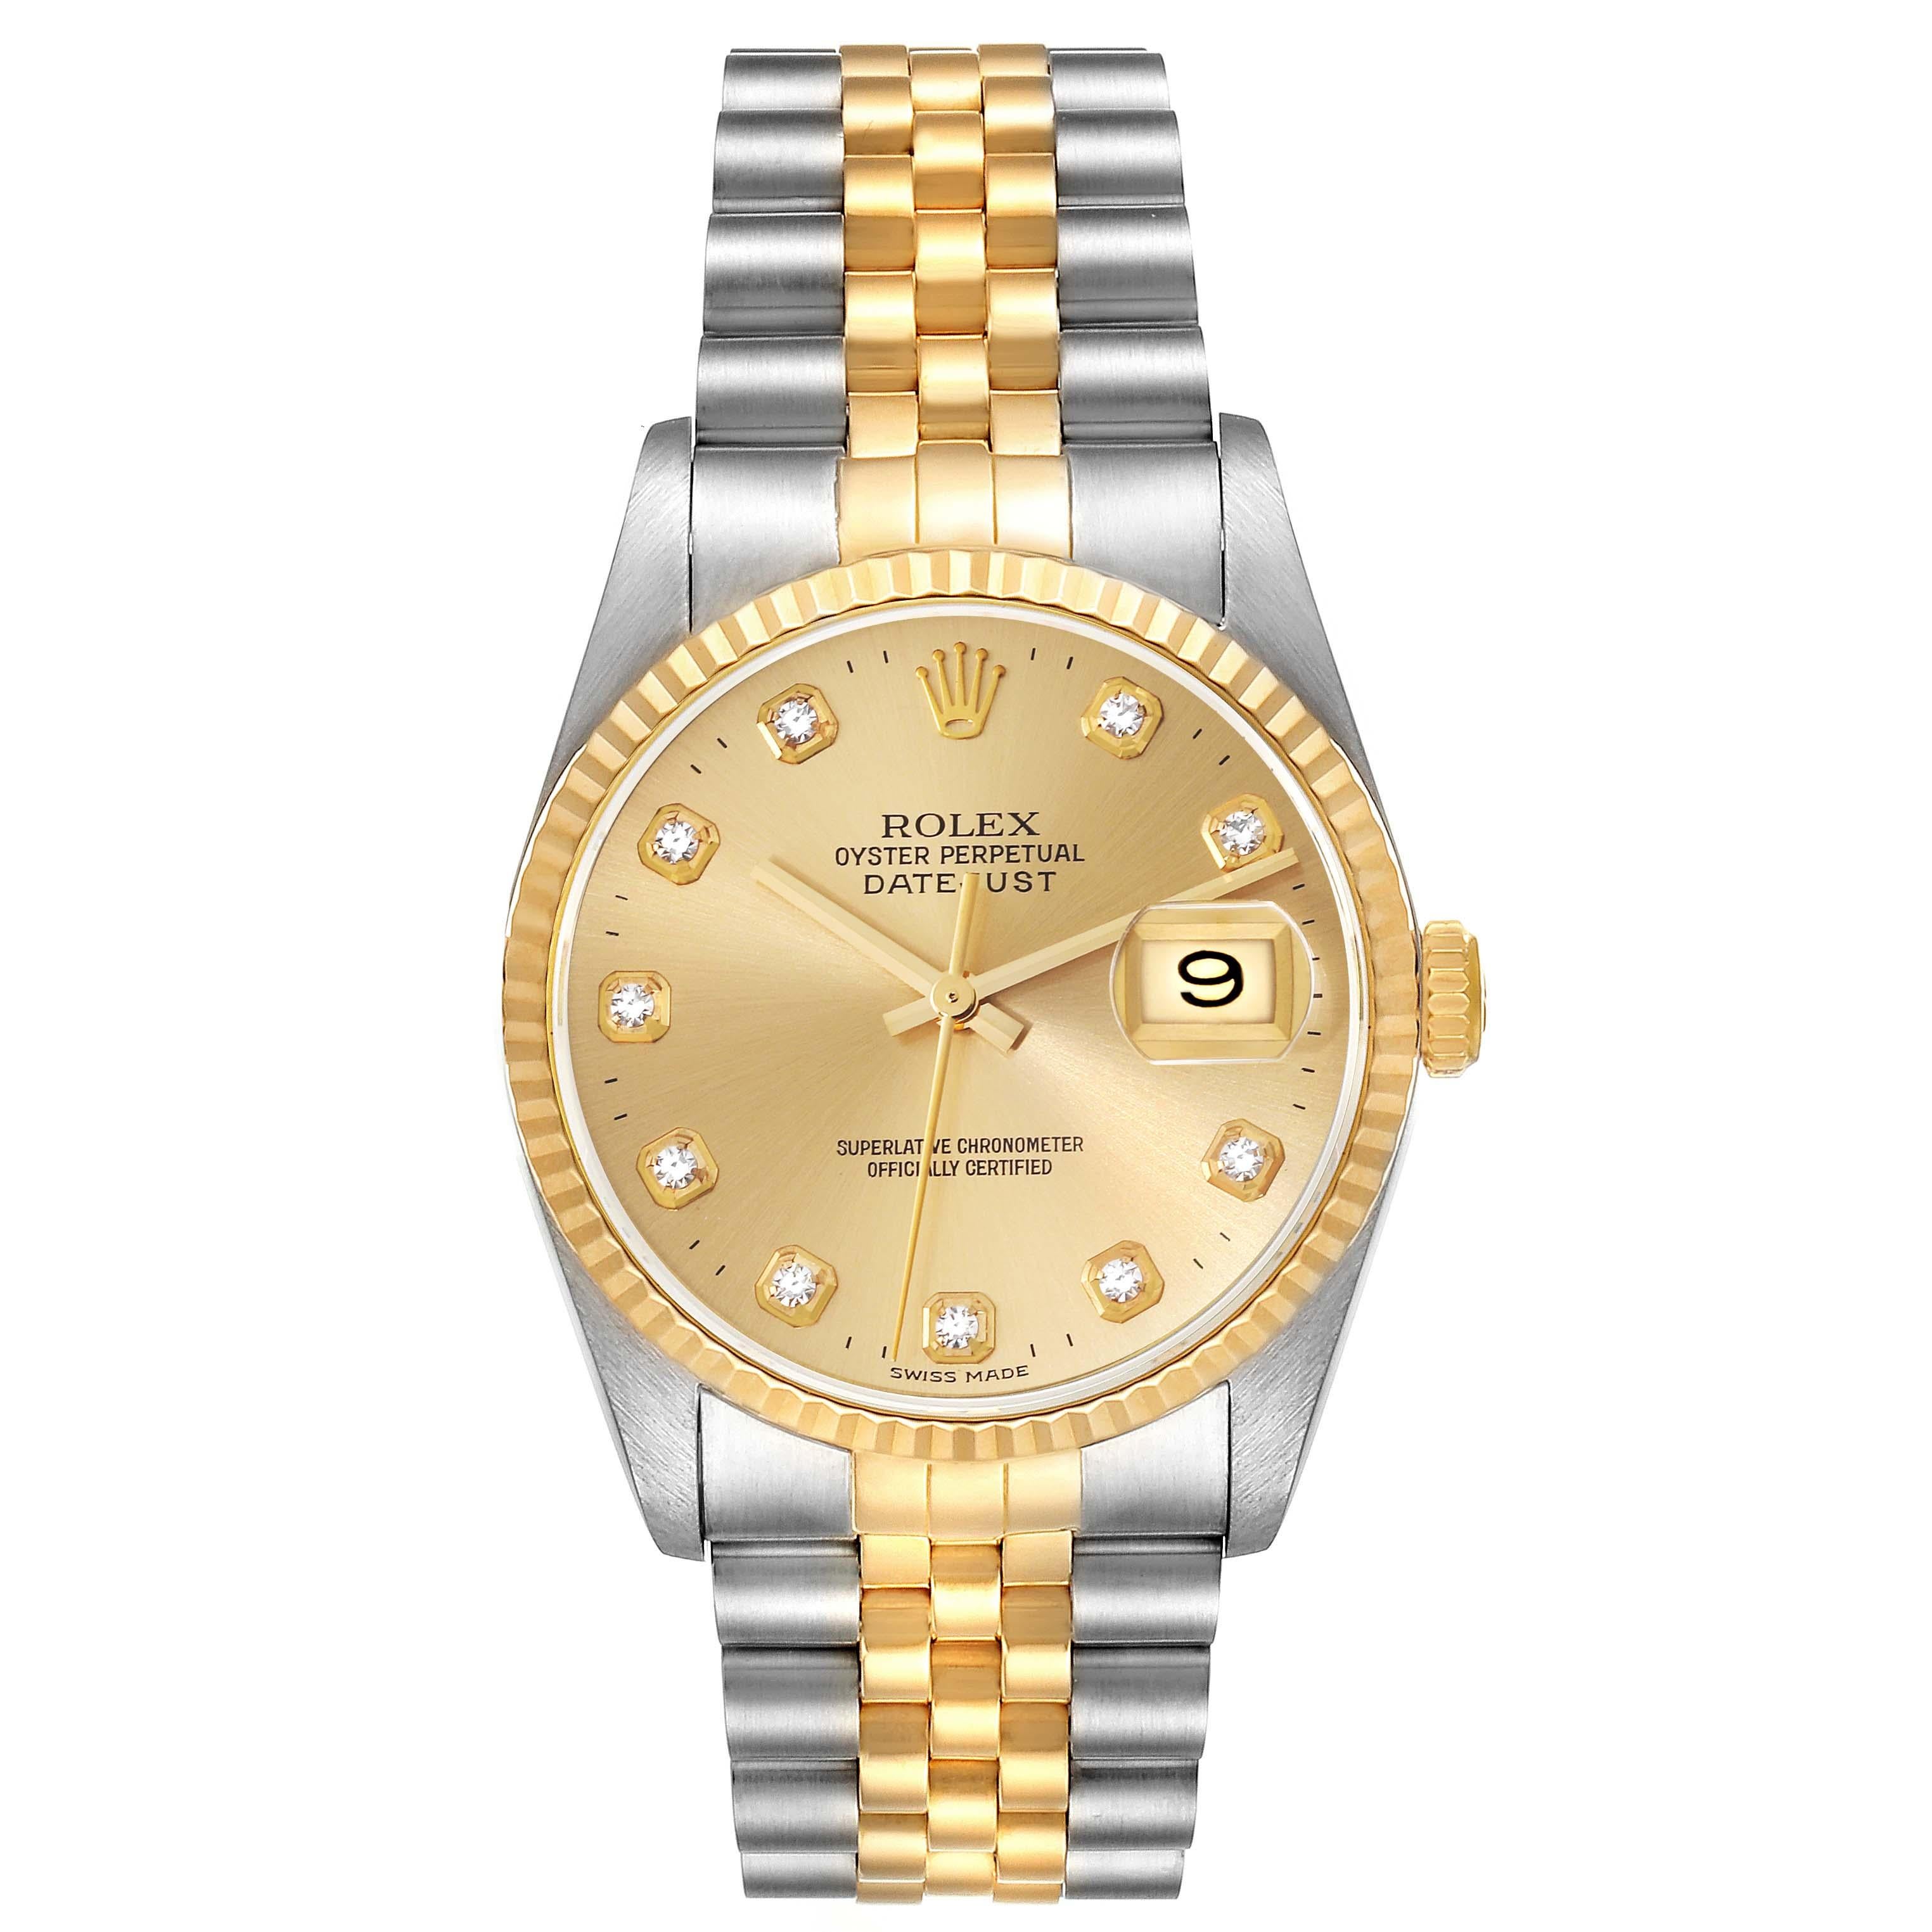 Rolex Datejust Stainless Steel Yellow Gold Mens Watch 16233 Box Papers. Officially certified chronometer automatic self-winding movement. Stainless steel case 36 mm in diameter.  Rolex logo on an 18K yellow gold crown. 18k yellow gold fluted bezel.